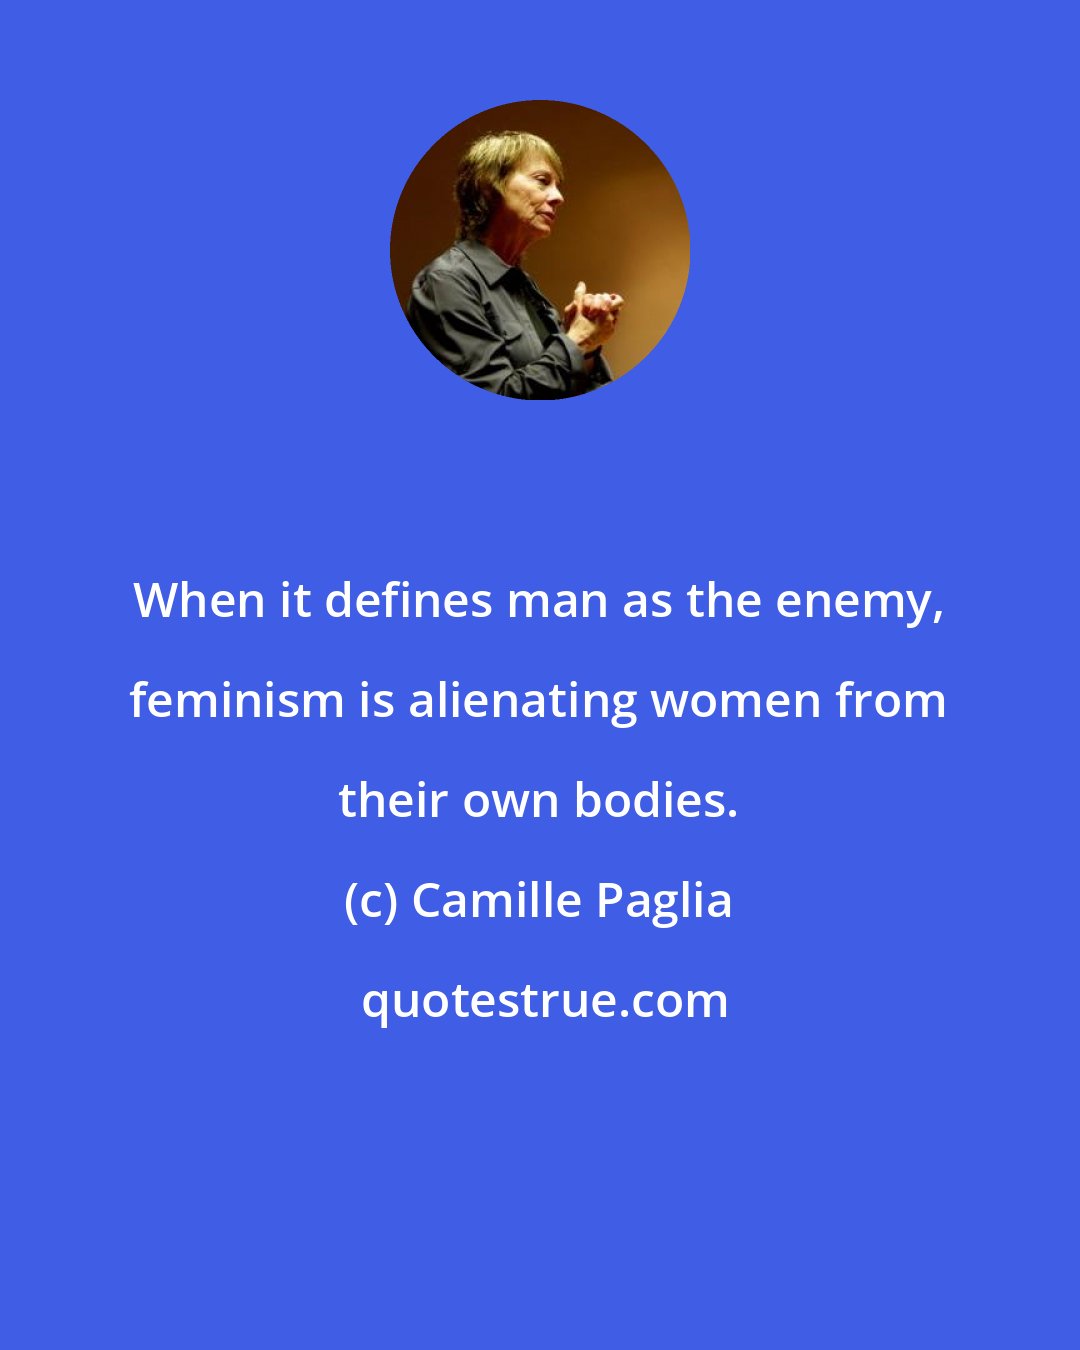 Camille Paglia: When it defines man as the enemy, feminism is alienating women from their own bodies.